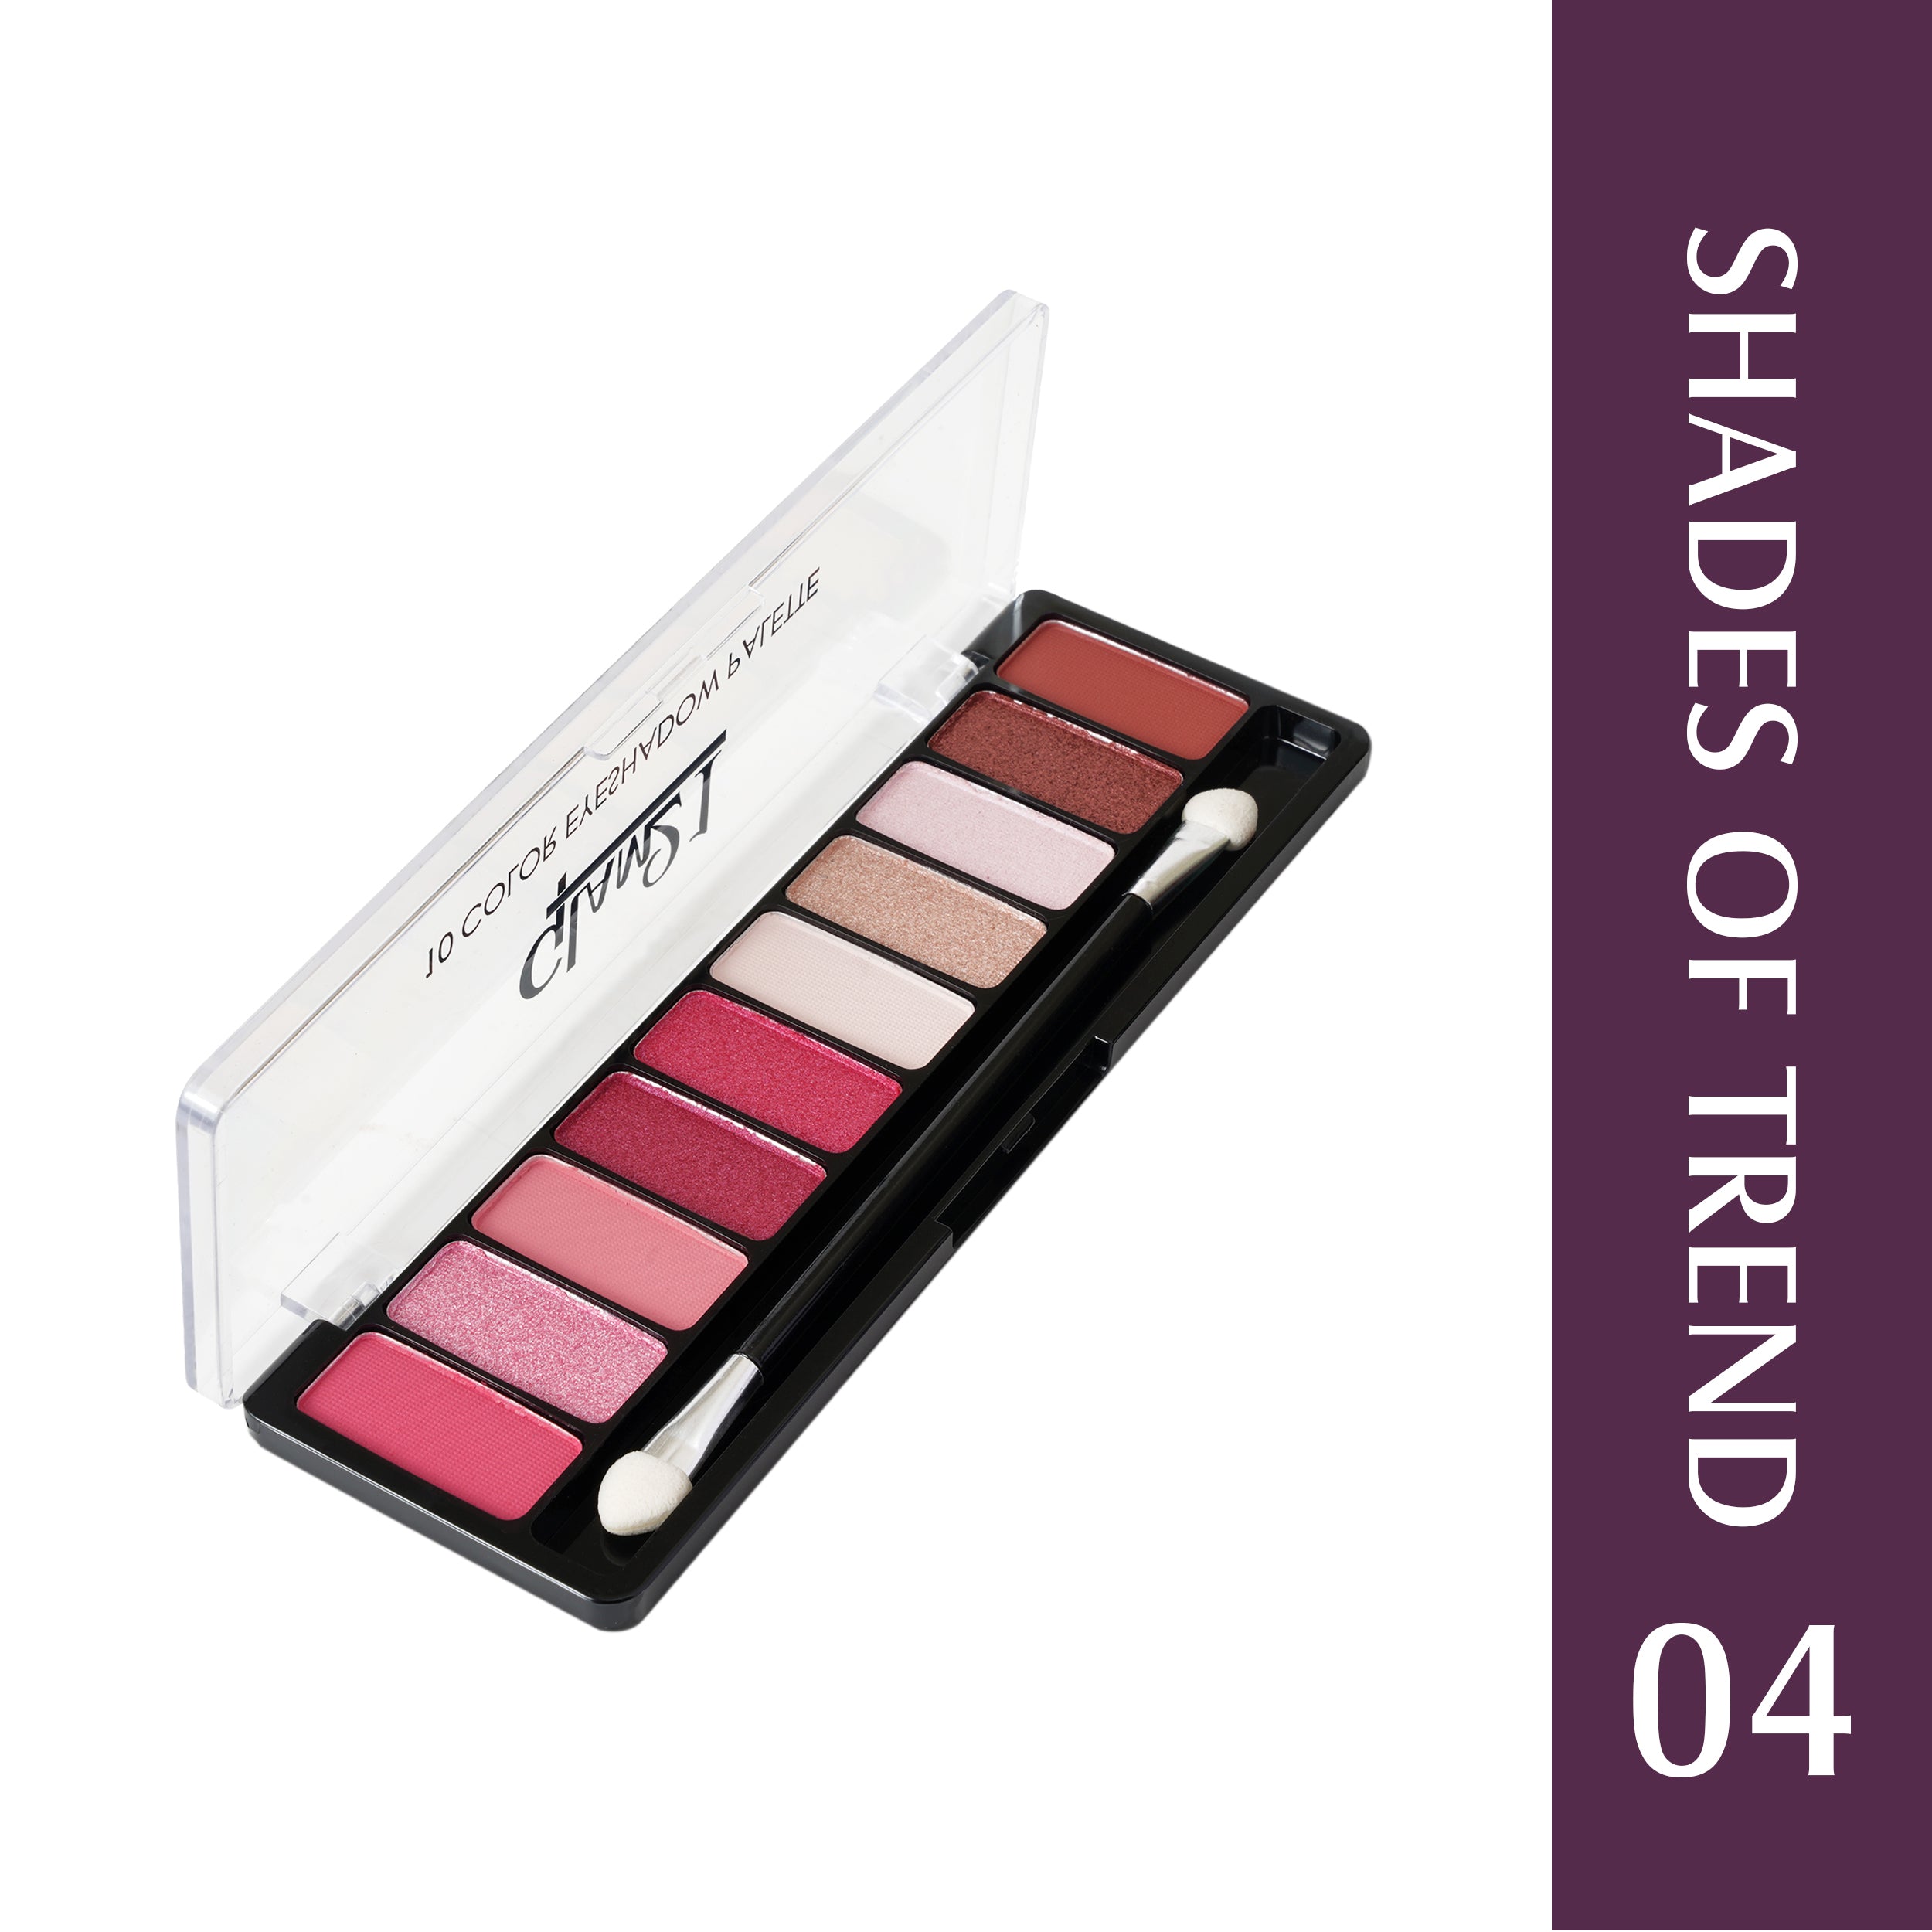 Glam21 10 Color Eyeshadow Palette - Soft Matte & Creamy Shimmer in Just One Swipe 8.8 g (Shade-04)